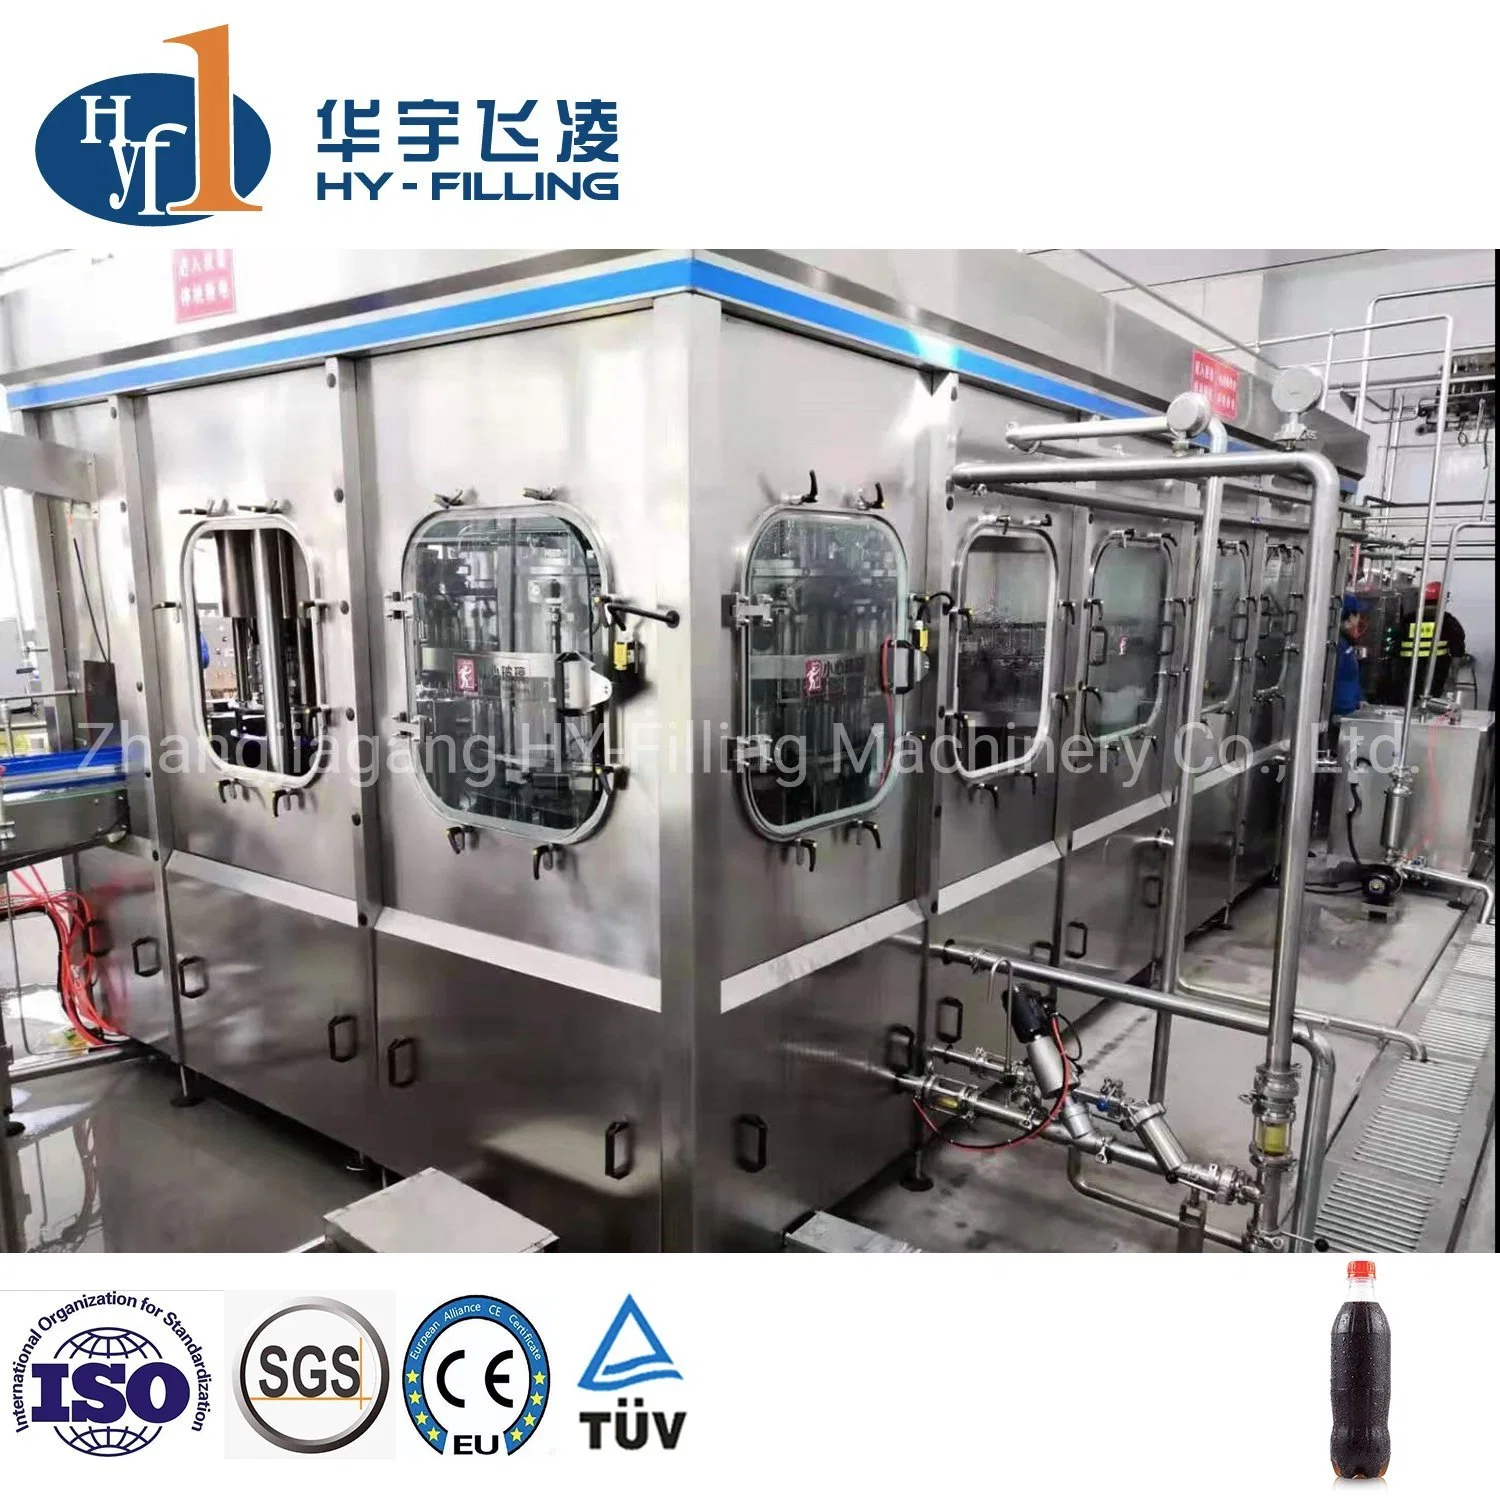 Automatic Packing Machine Filling Beverage Packaging Pet Plastic 12000bph Fresh Craft Beer Filling Capper Machine